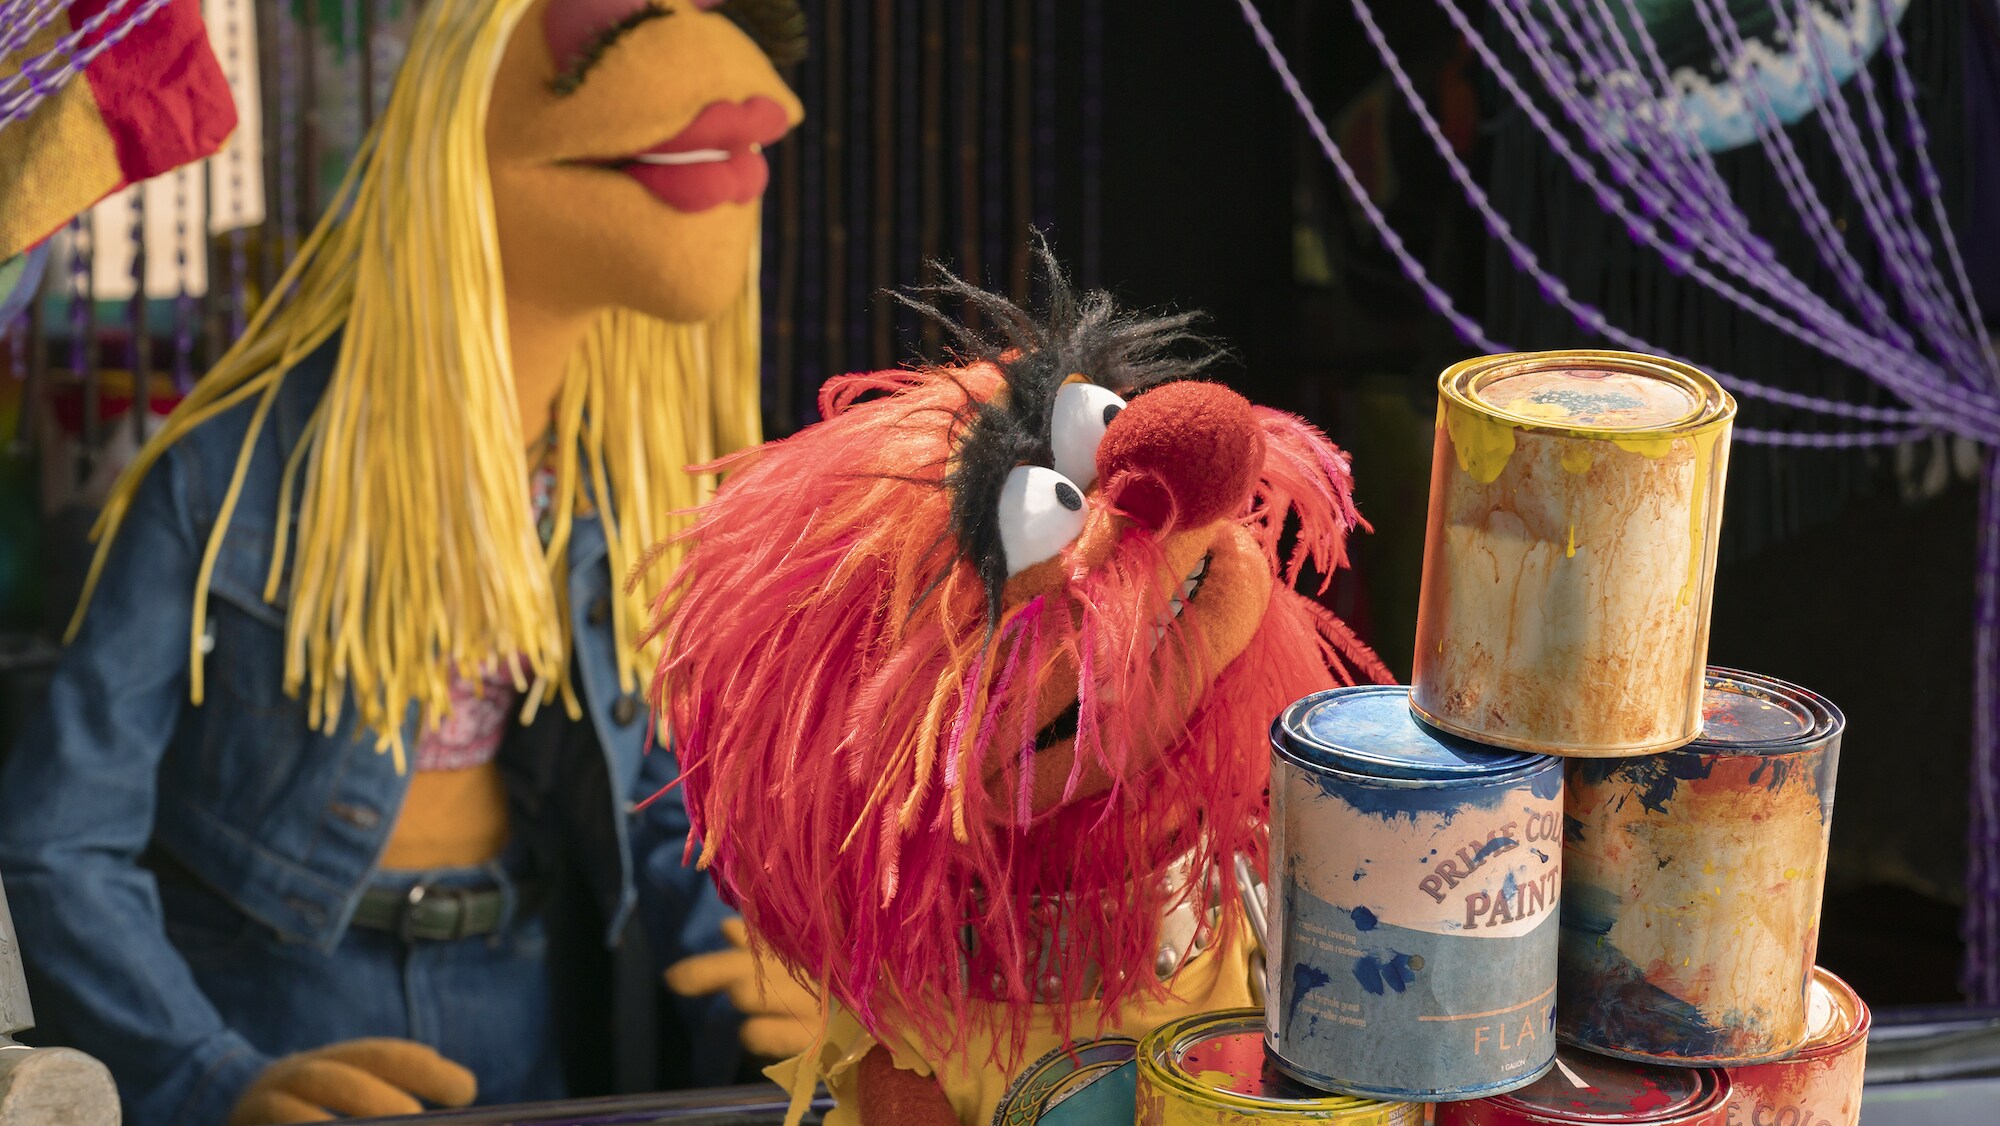 THE MUPPETS MAYHEM -  “Track 1: Can You Picture That?” (Disney/Mitch Haaseth) JANICE, ANIMAL